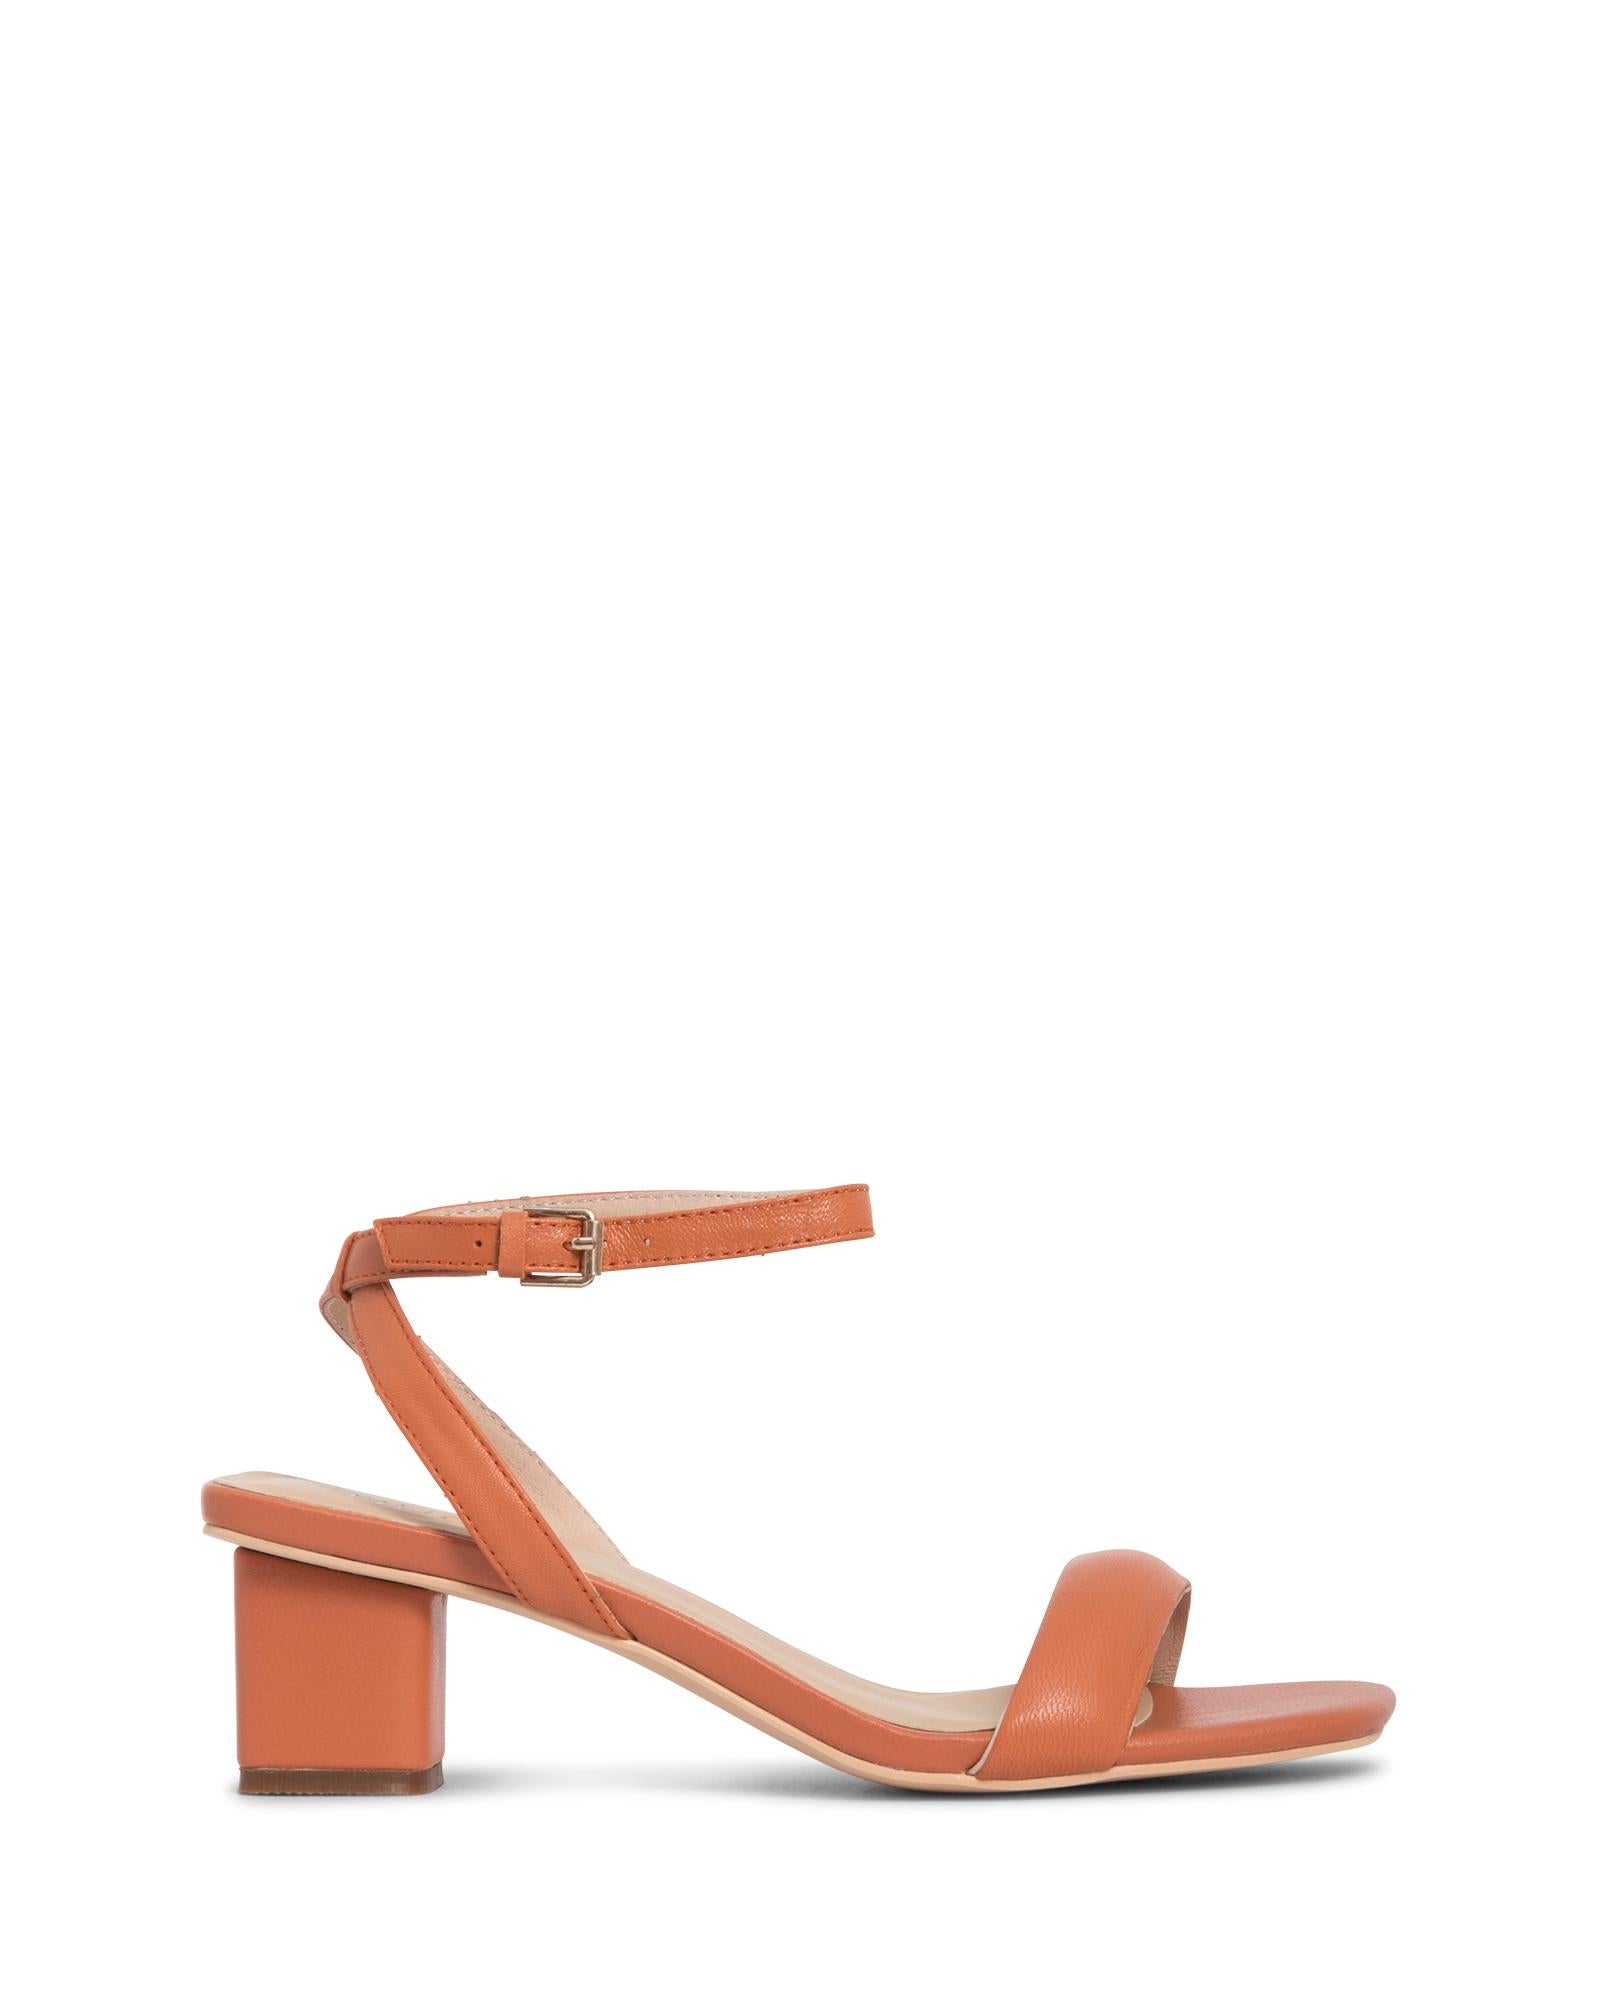 Harlyn Burnt Orange 5cm Low Block Heel with Square Toe and Adjustable Ankle Strap